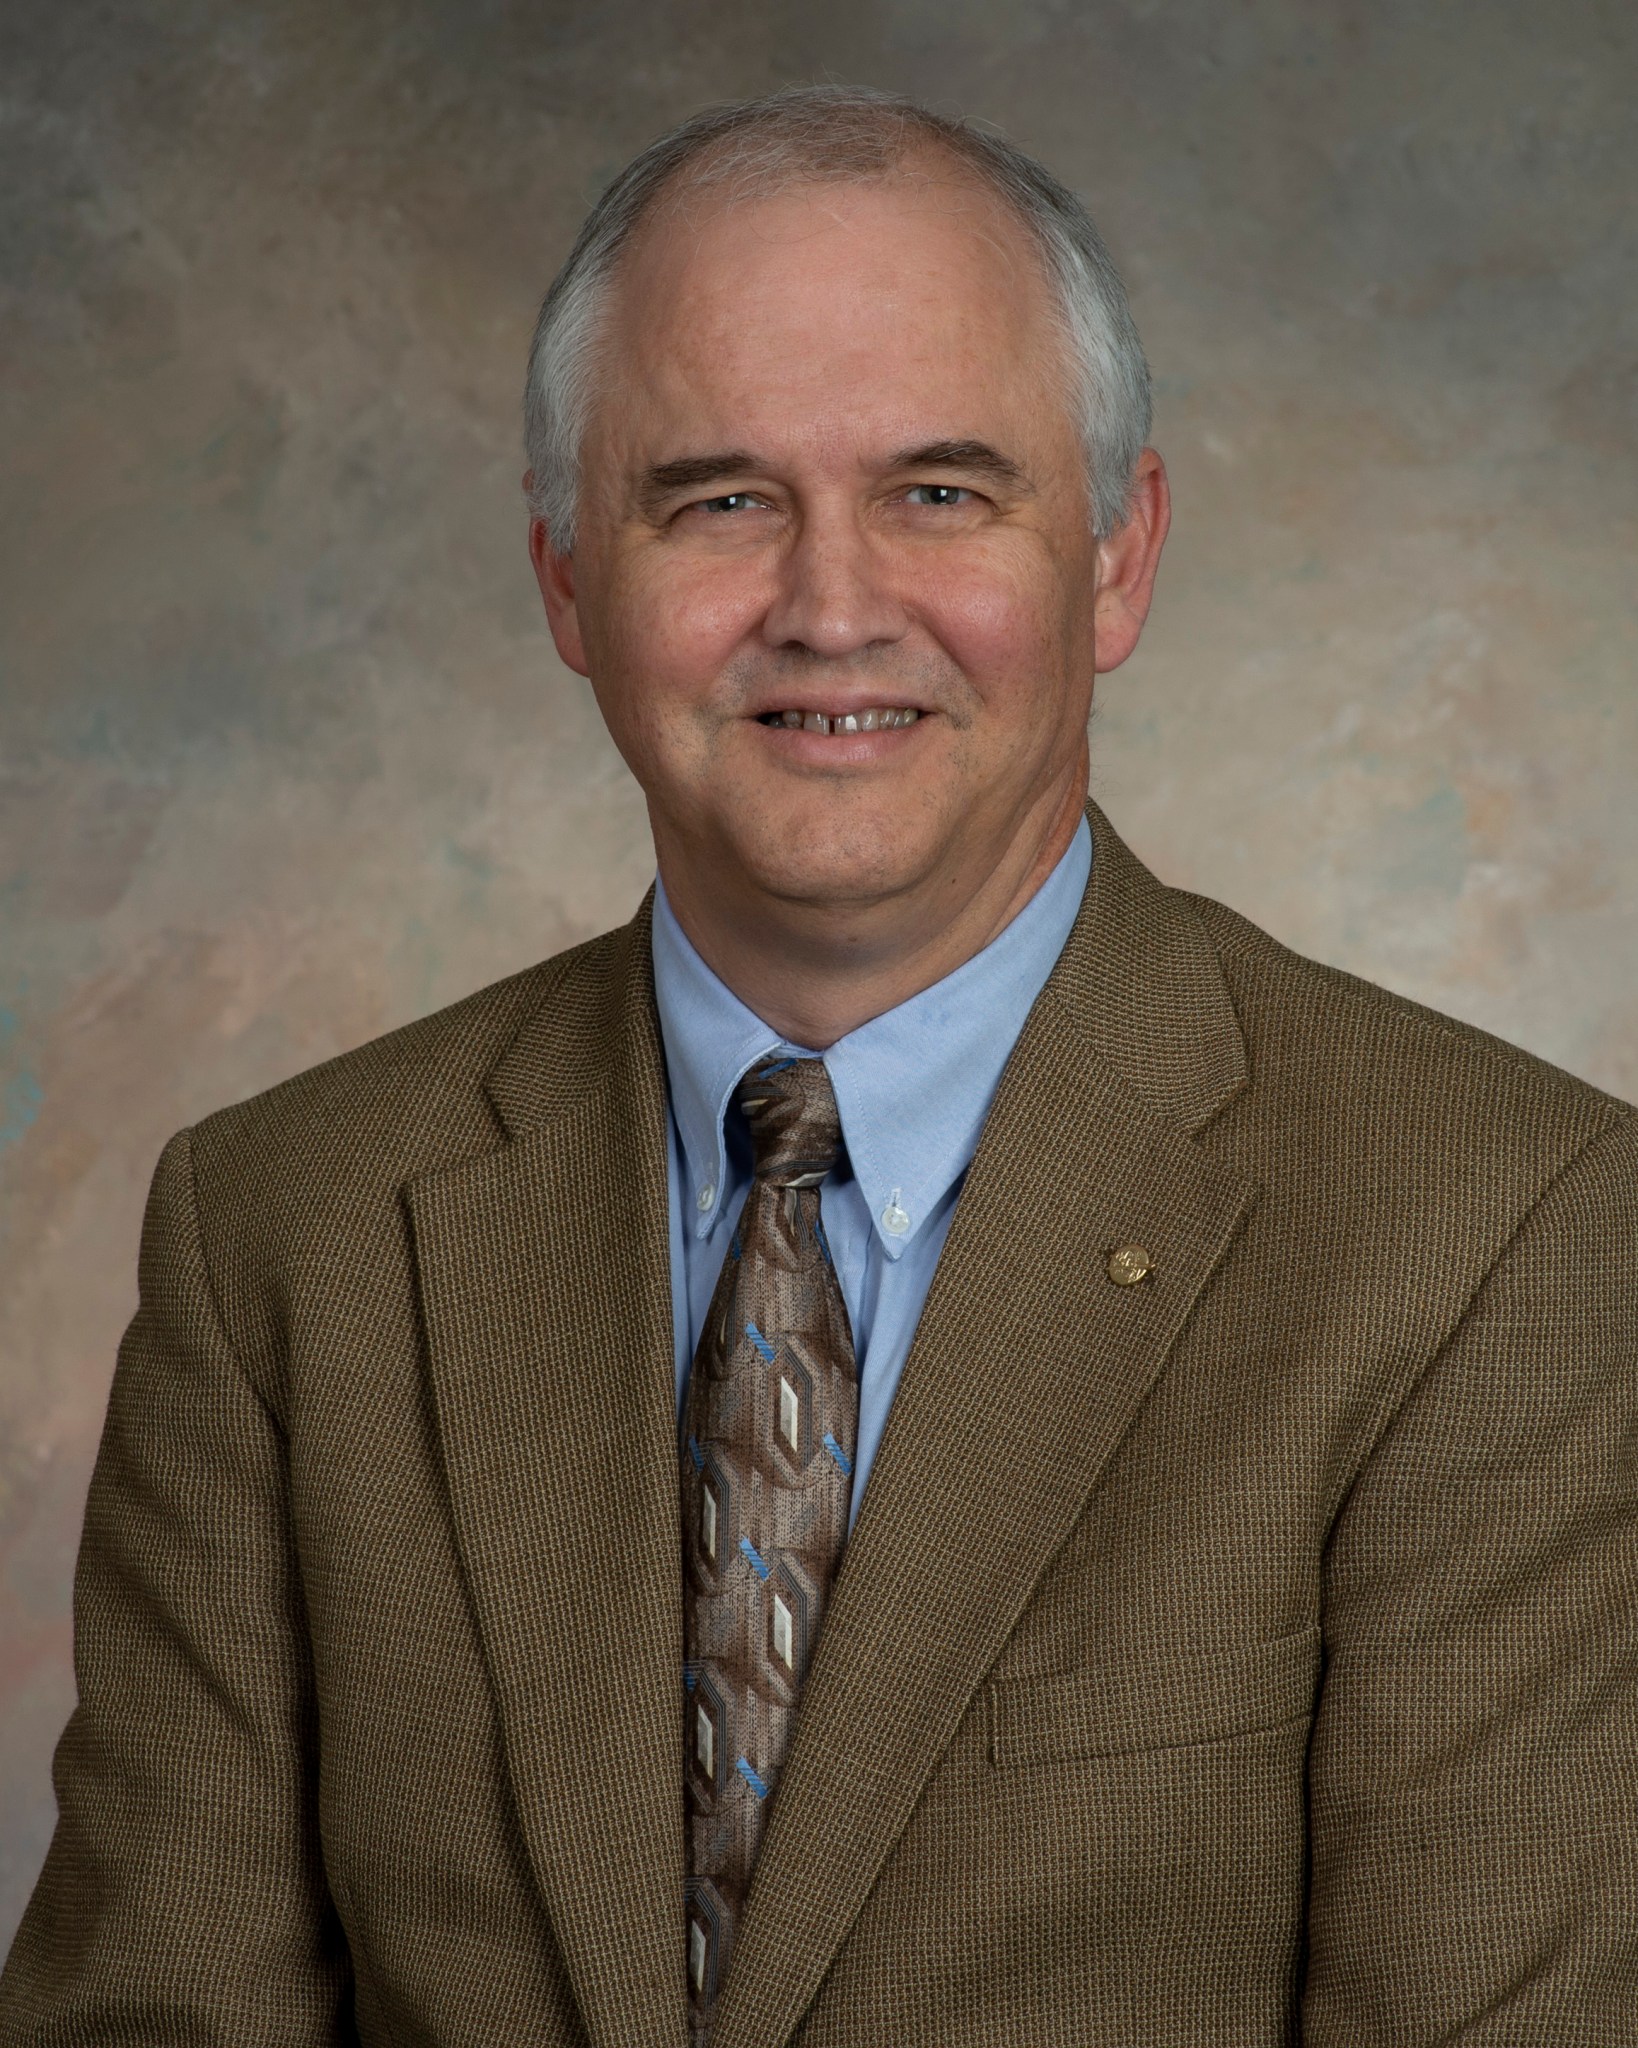 Tim Smith is mission manager at Marshall for LCRD, helping to ensure its success under the Technology Demonstration Missions program.